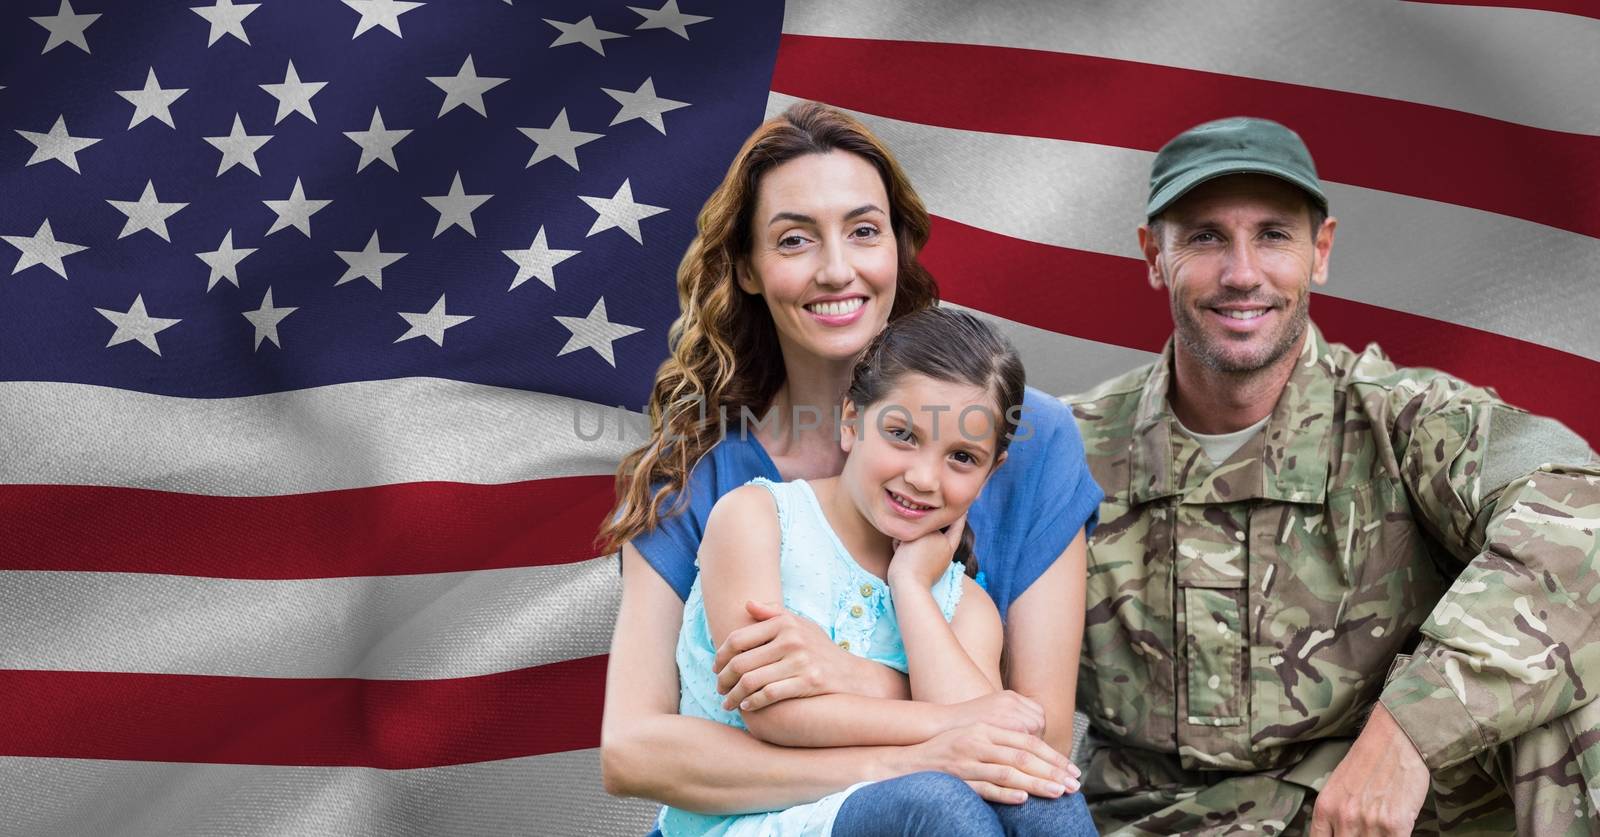 Soldier reunited with his family against american flag background